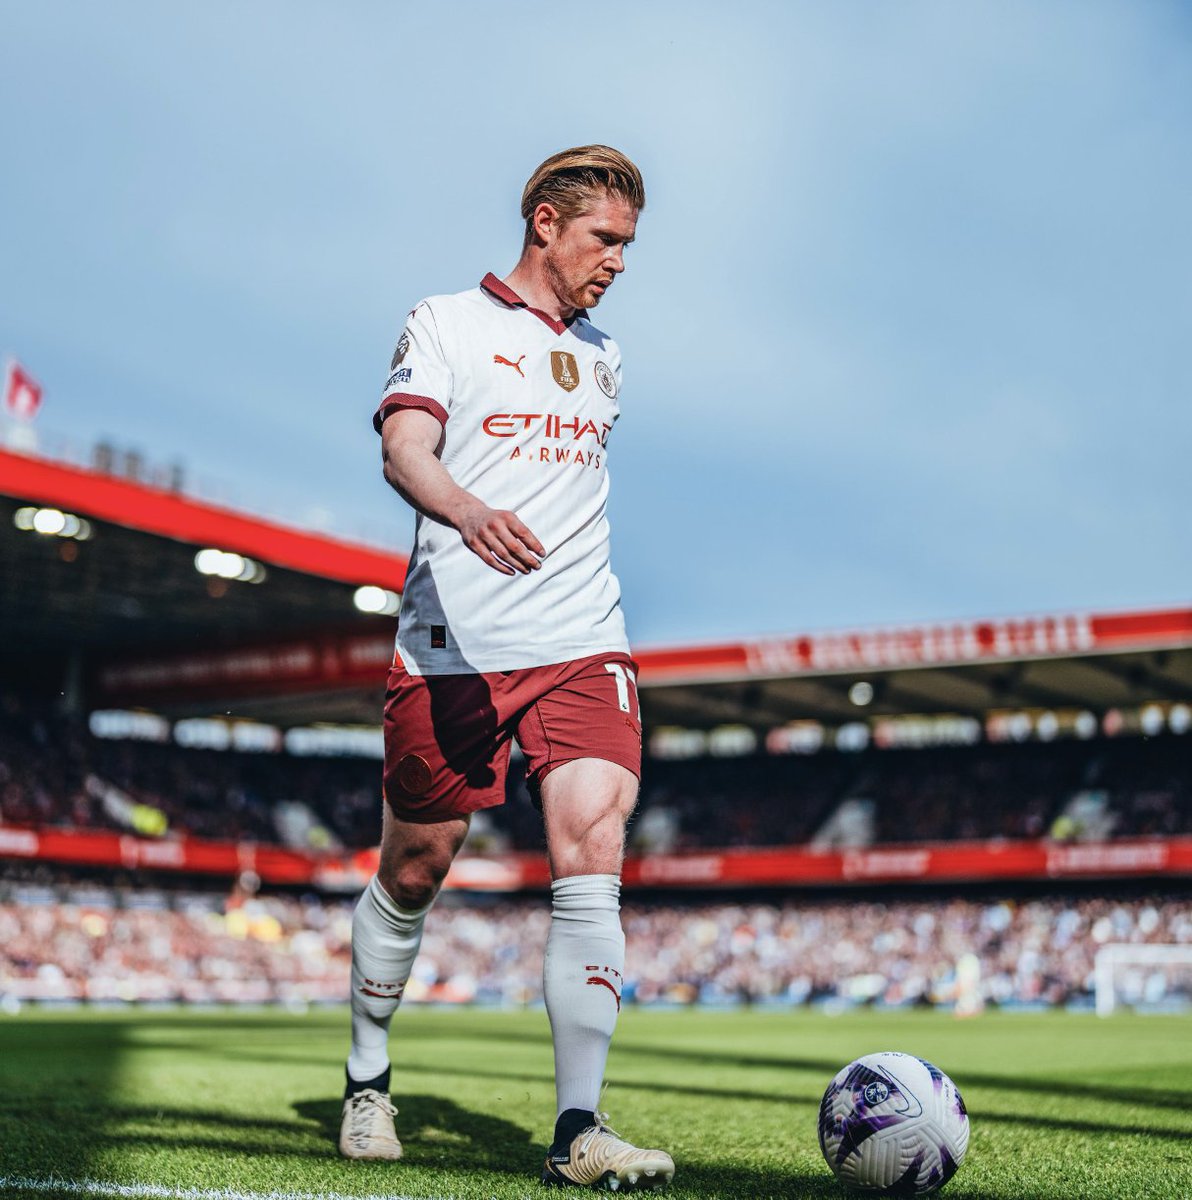 🎯 32' assist 🎯 71' assist Kevin De Bruyne has now made 110 assists in the Premier League, just behind Fàbregas, the second highest assist maker in the league's history. 👀